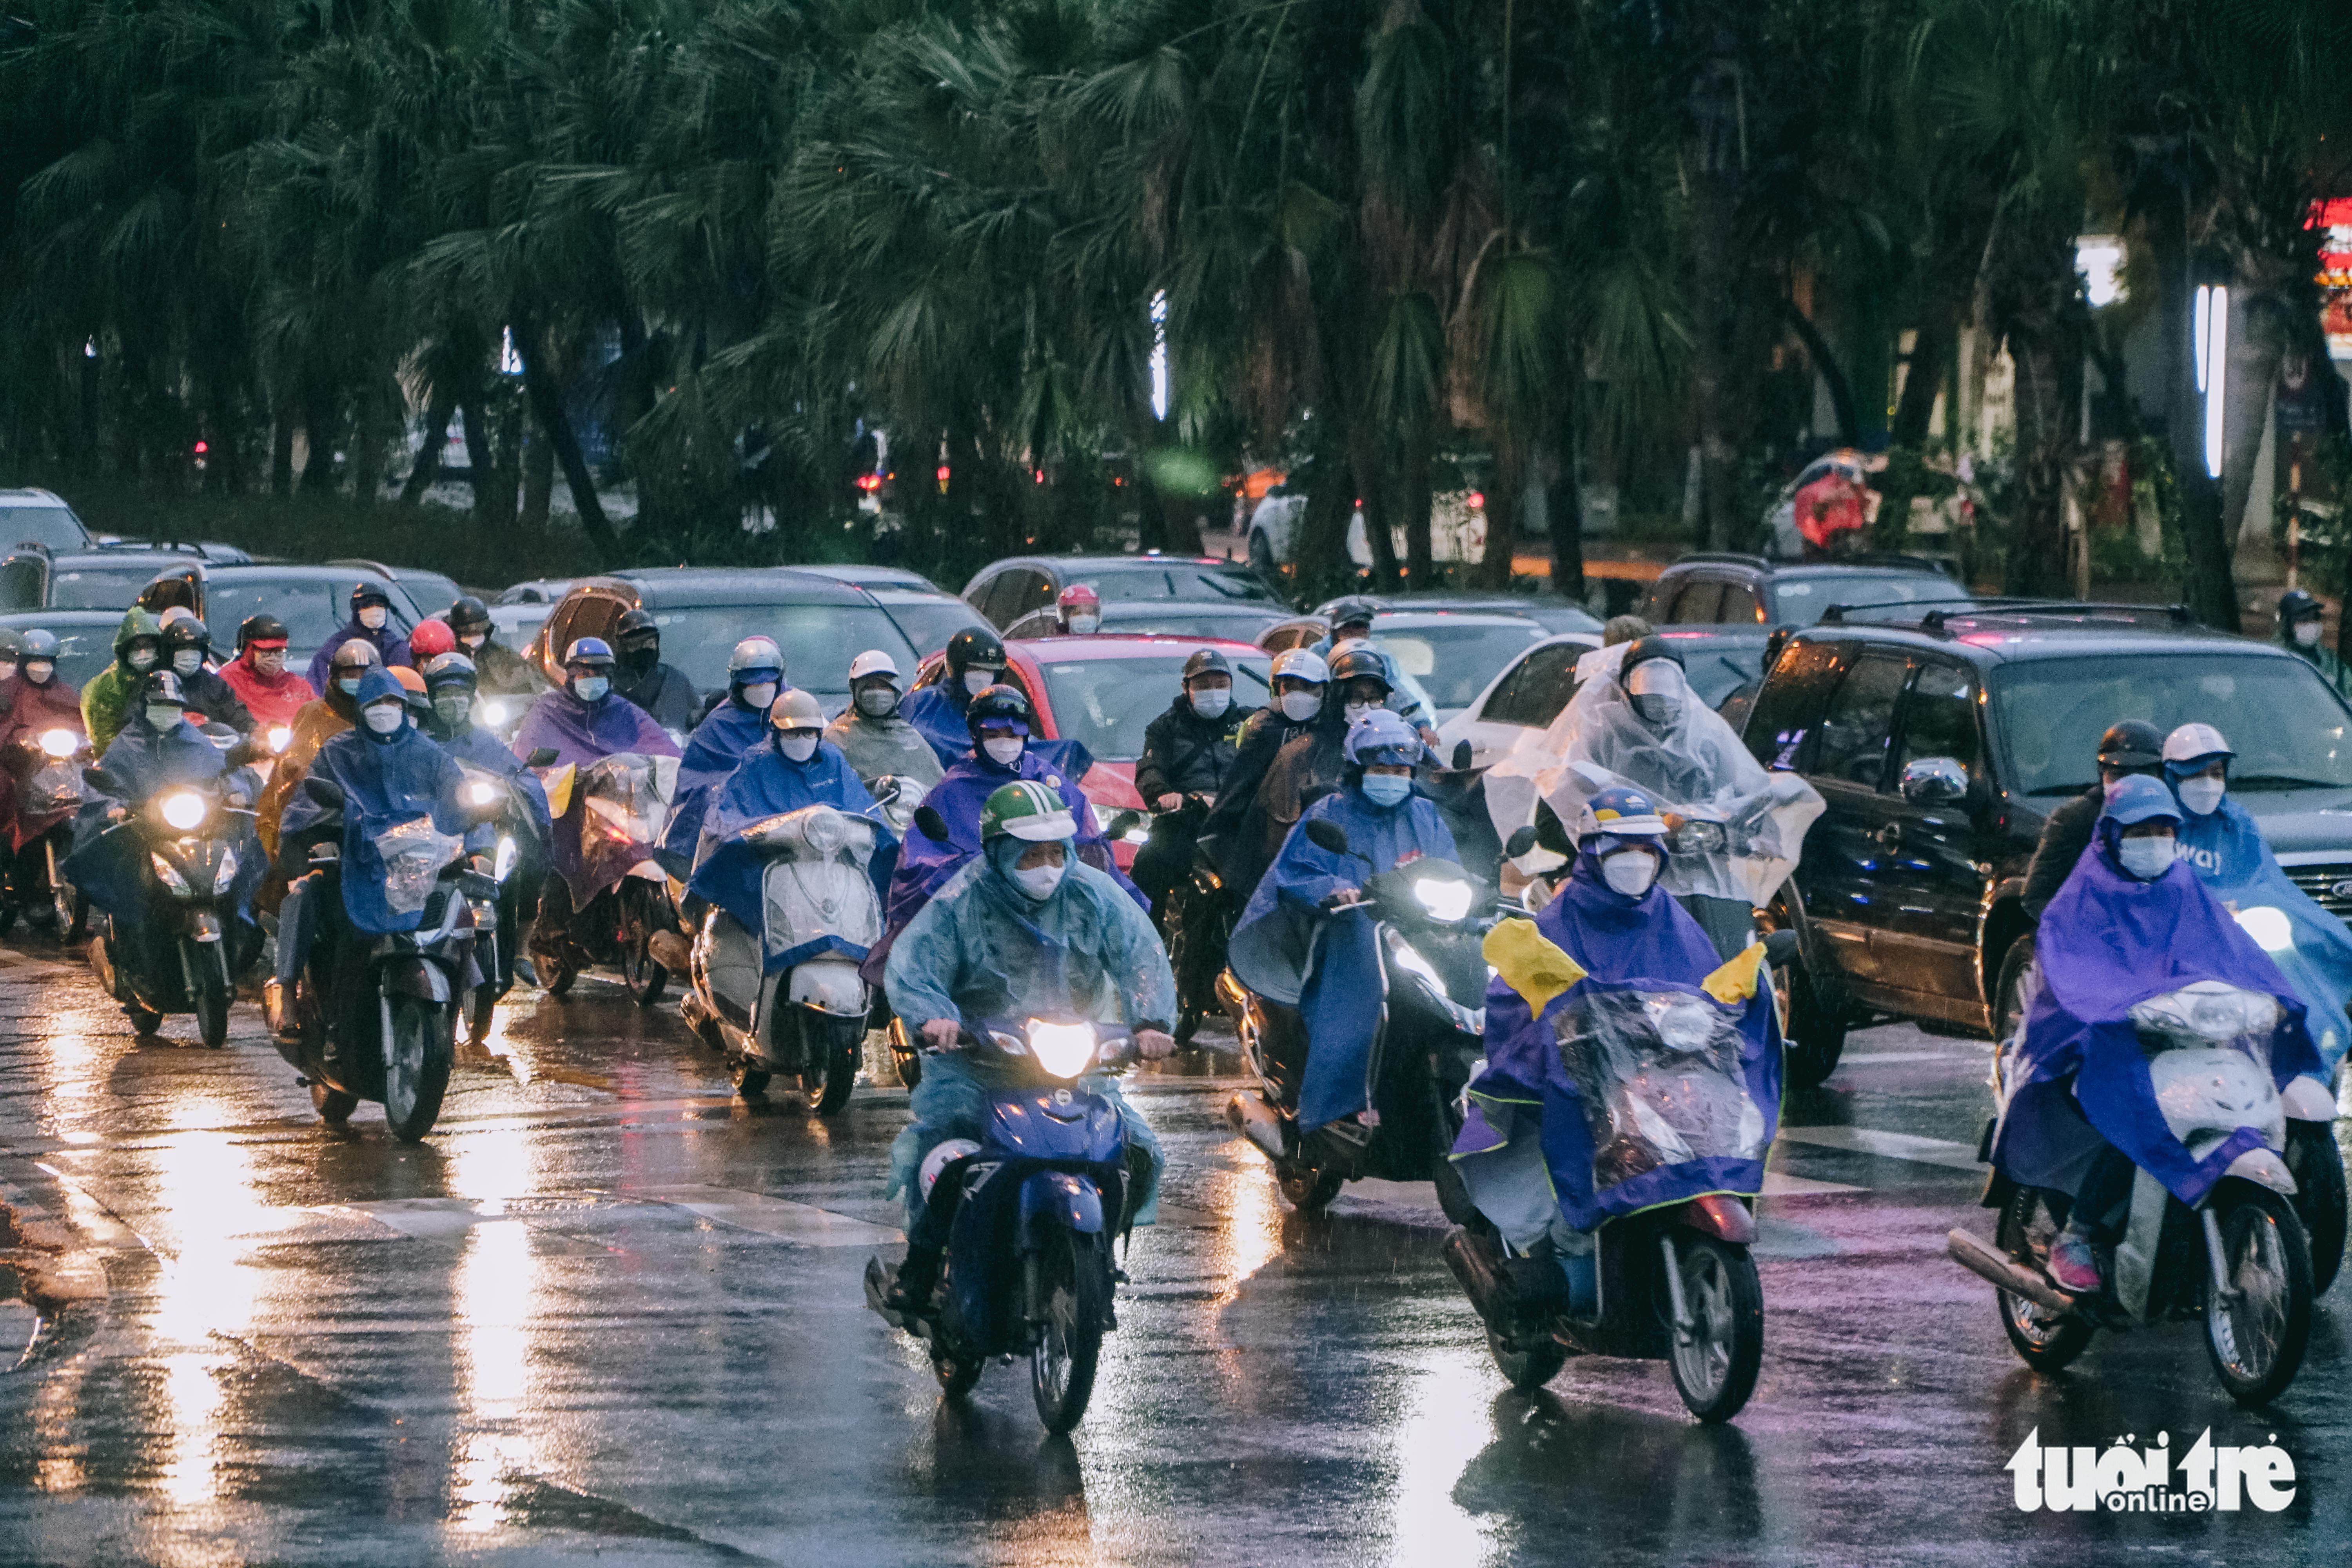 Hanoi temperature dips to 9 degrees Celsius as strong cold spell hits